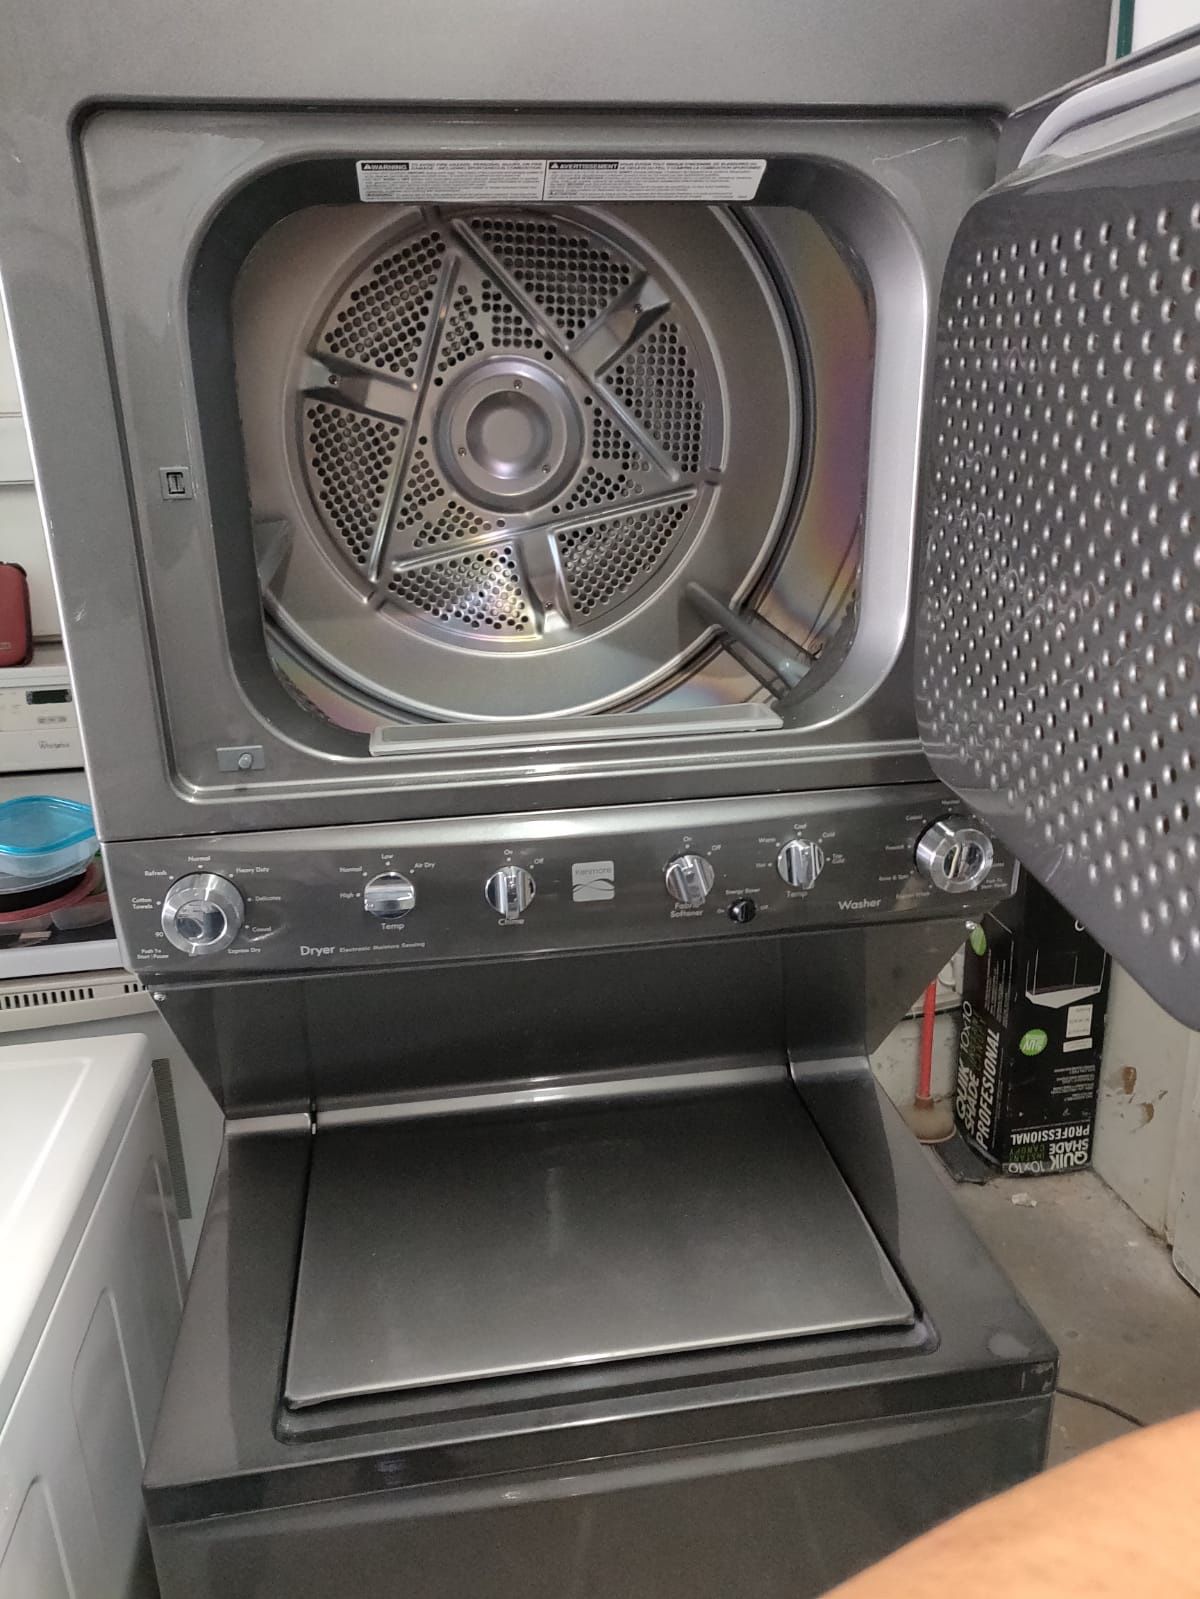 Washer and dryer Kenmore. Excellent condition!!!